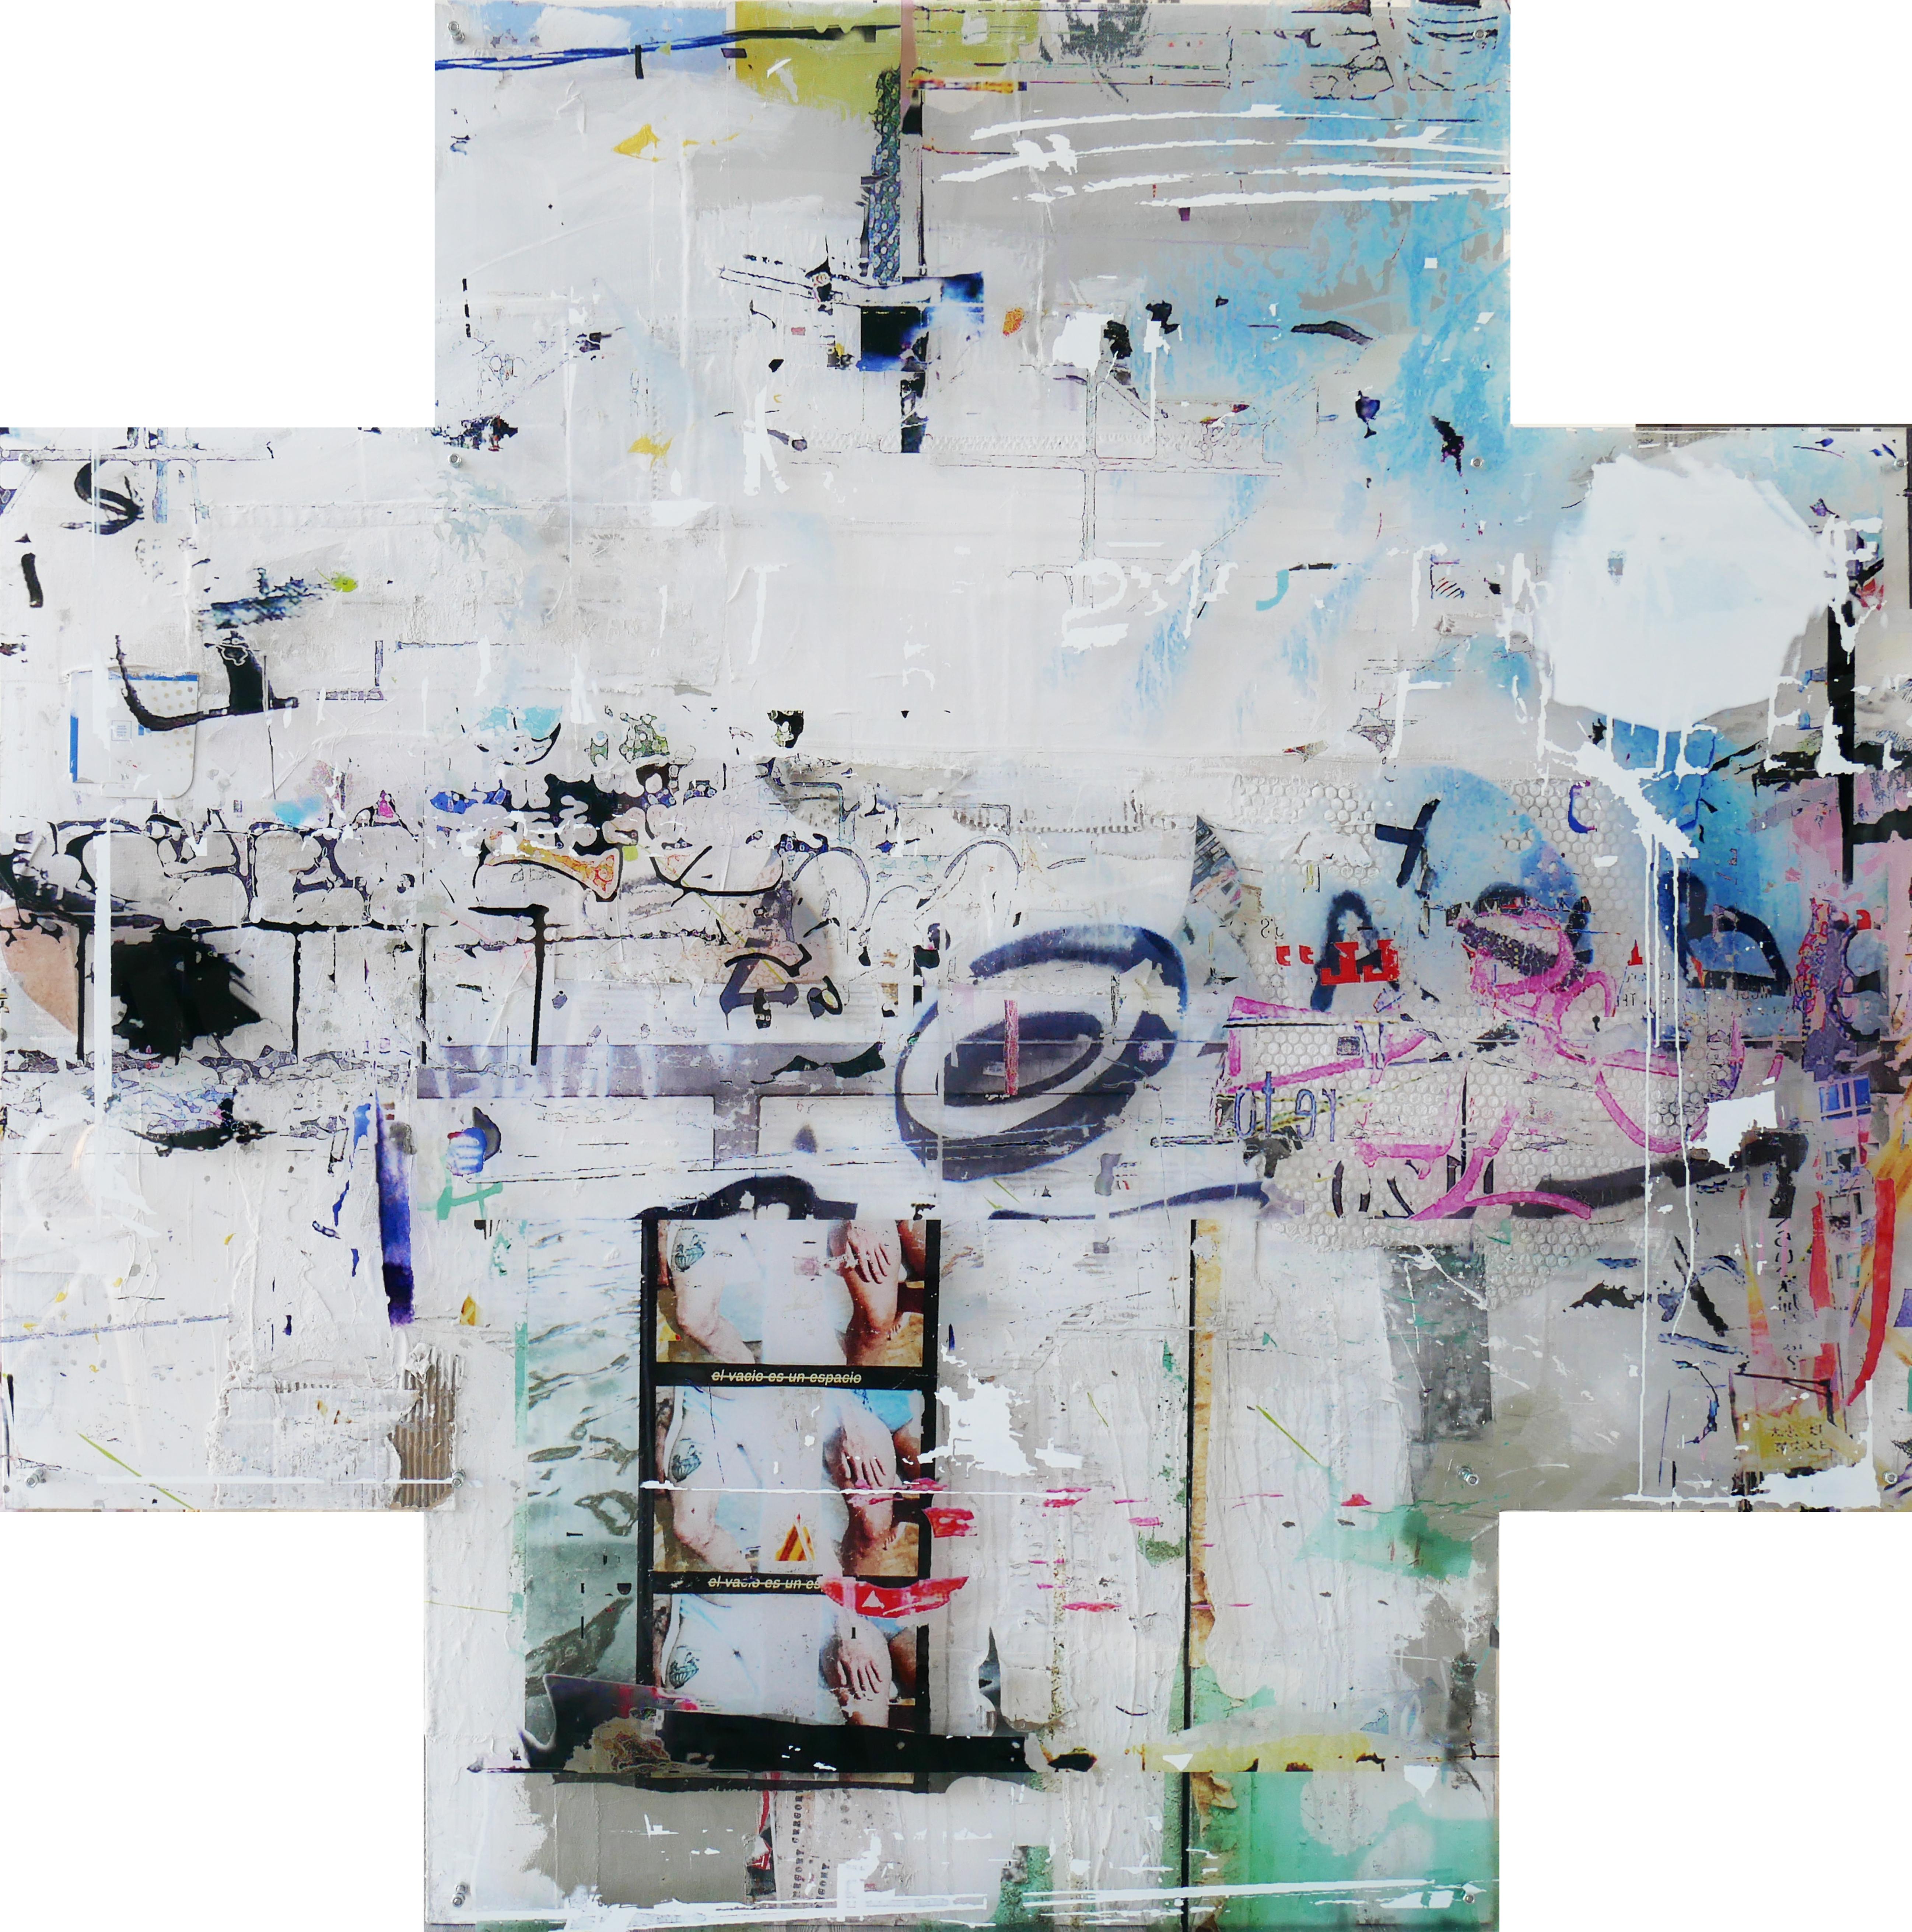 Gregory Watin
Cross
Mixed media on plexiglass and wood
Urban and street art
160 x 160 cm
63 x 63 inches